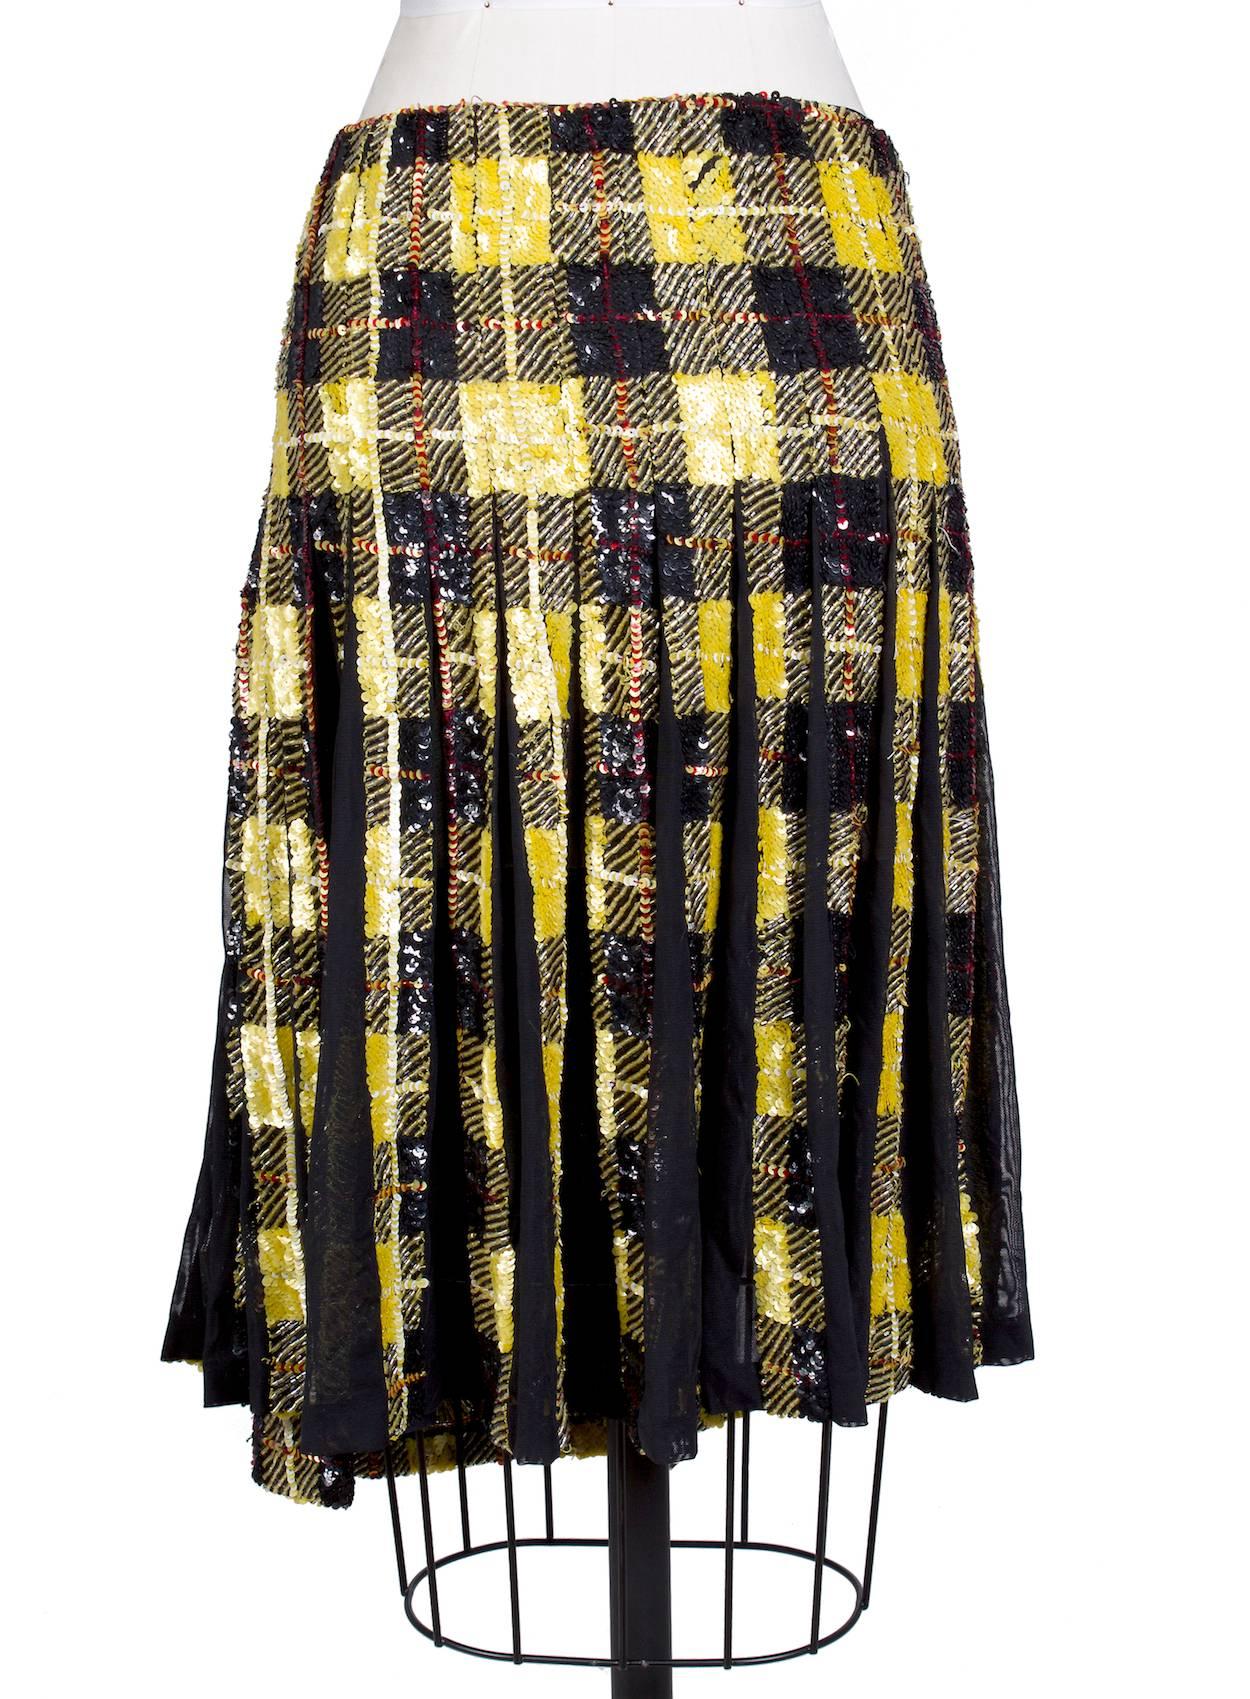 This is a skirt by Jean Paul Gaultier circa 2000s.  It features a plaid pattern made entirely from sequins and features back pleating with mesh panels.  Snap waist closure.  